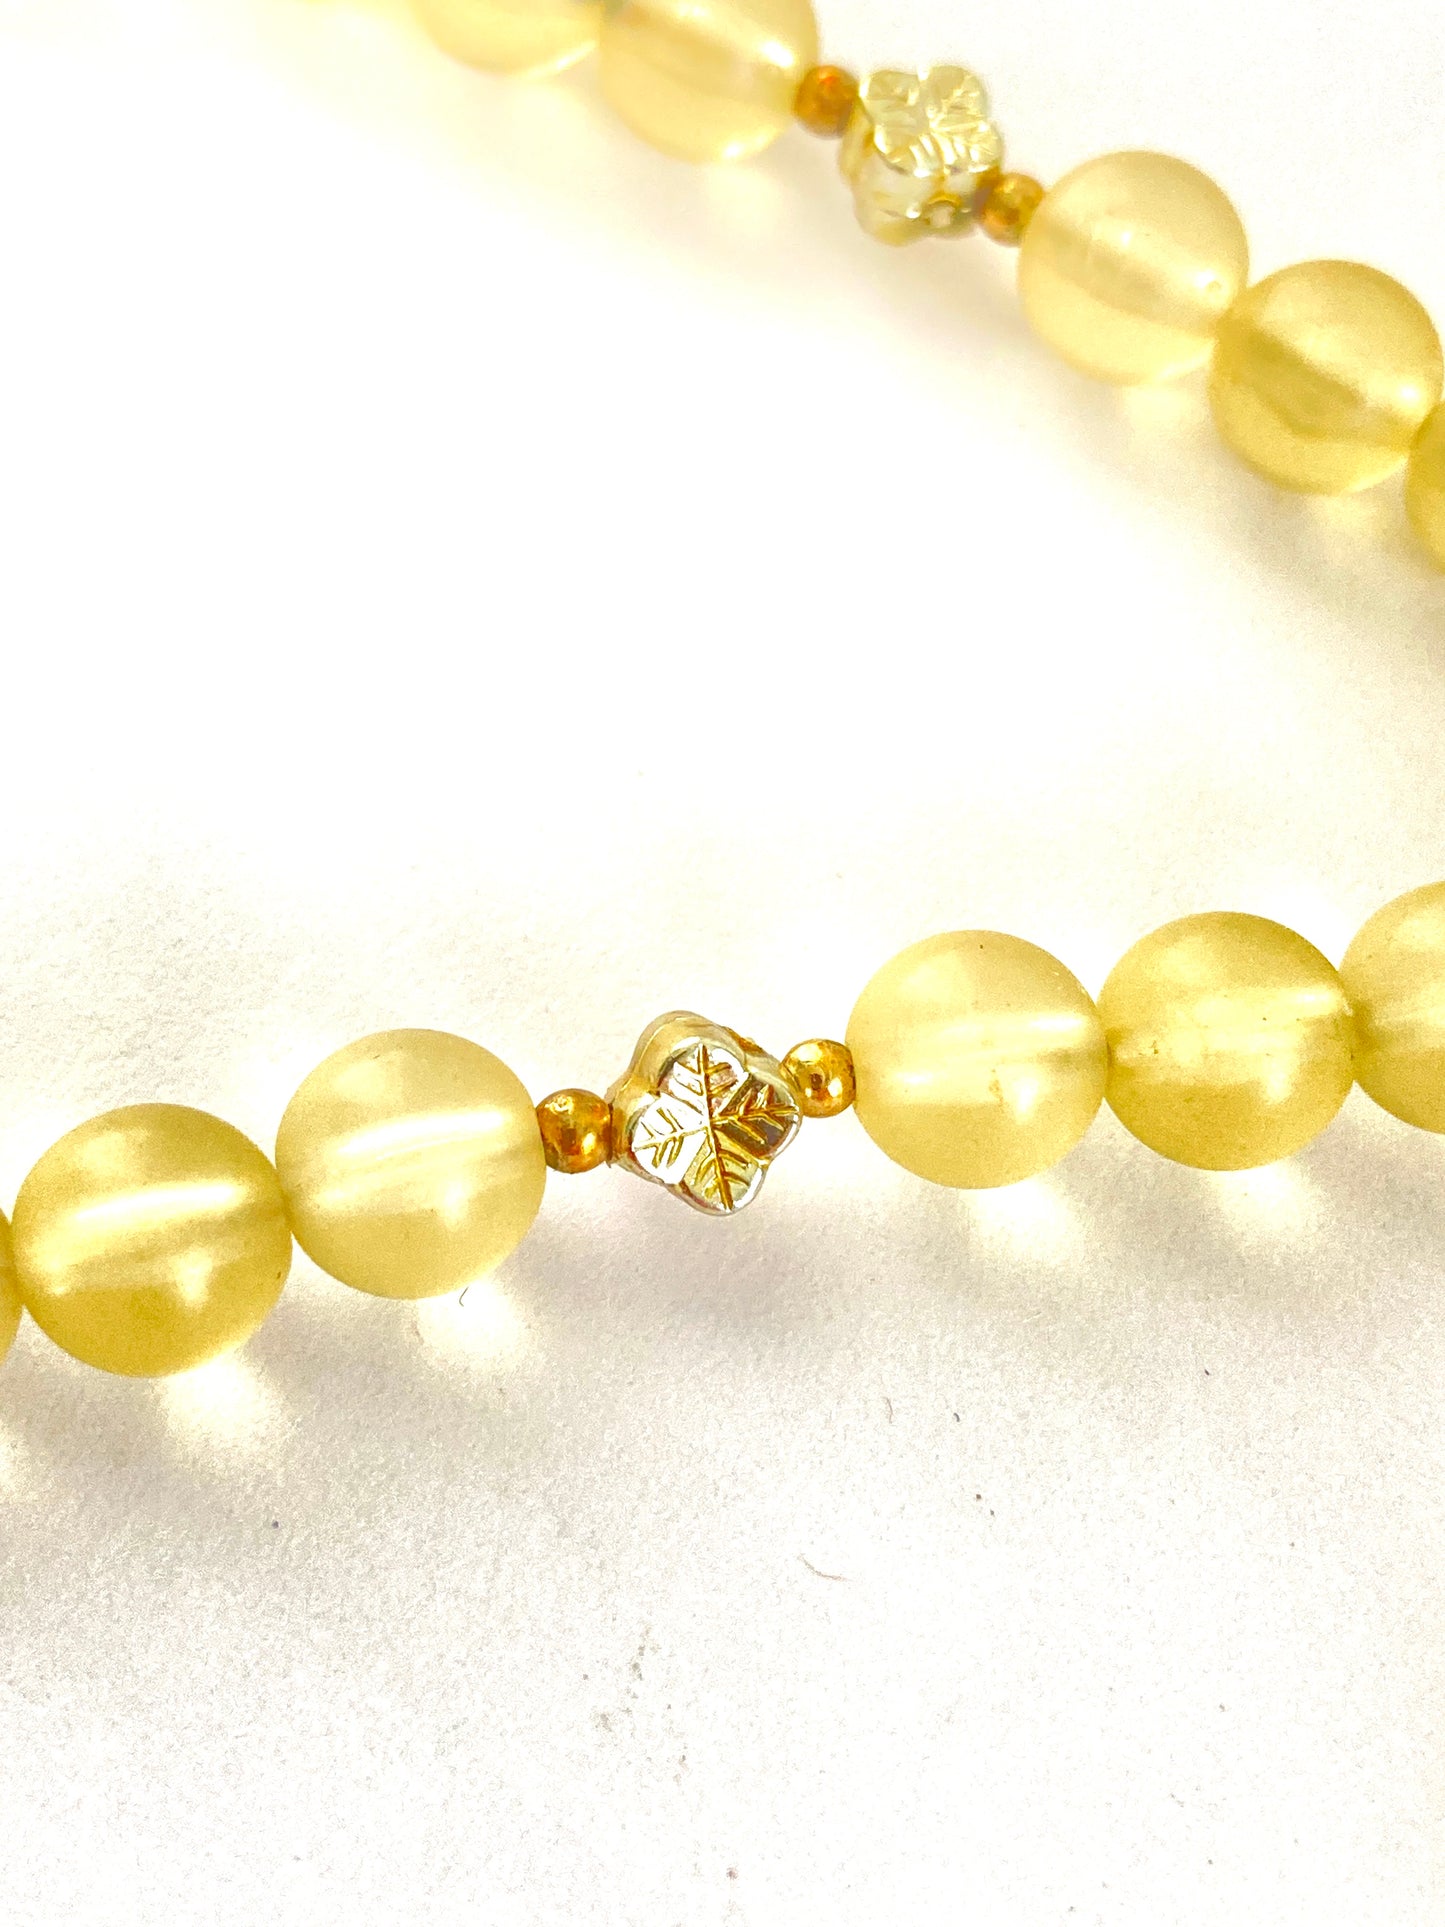 Yellow Frosted Lucite Beaded Necklace